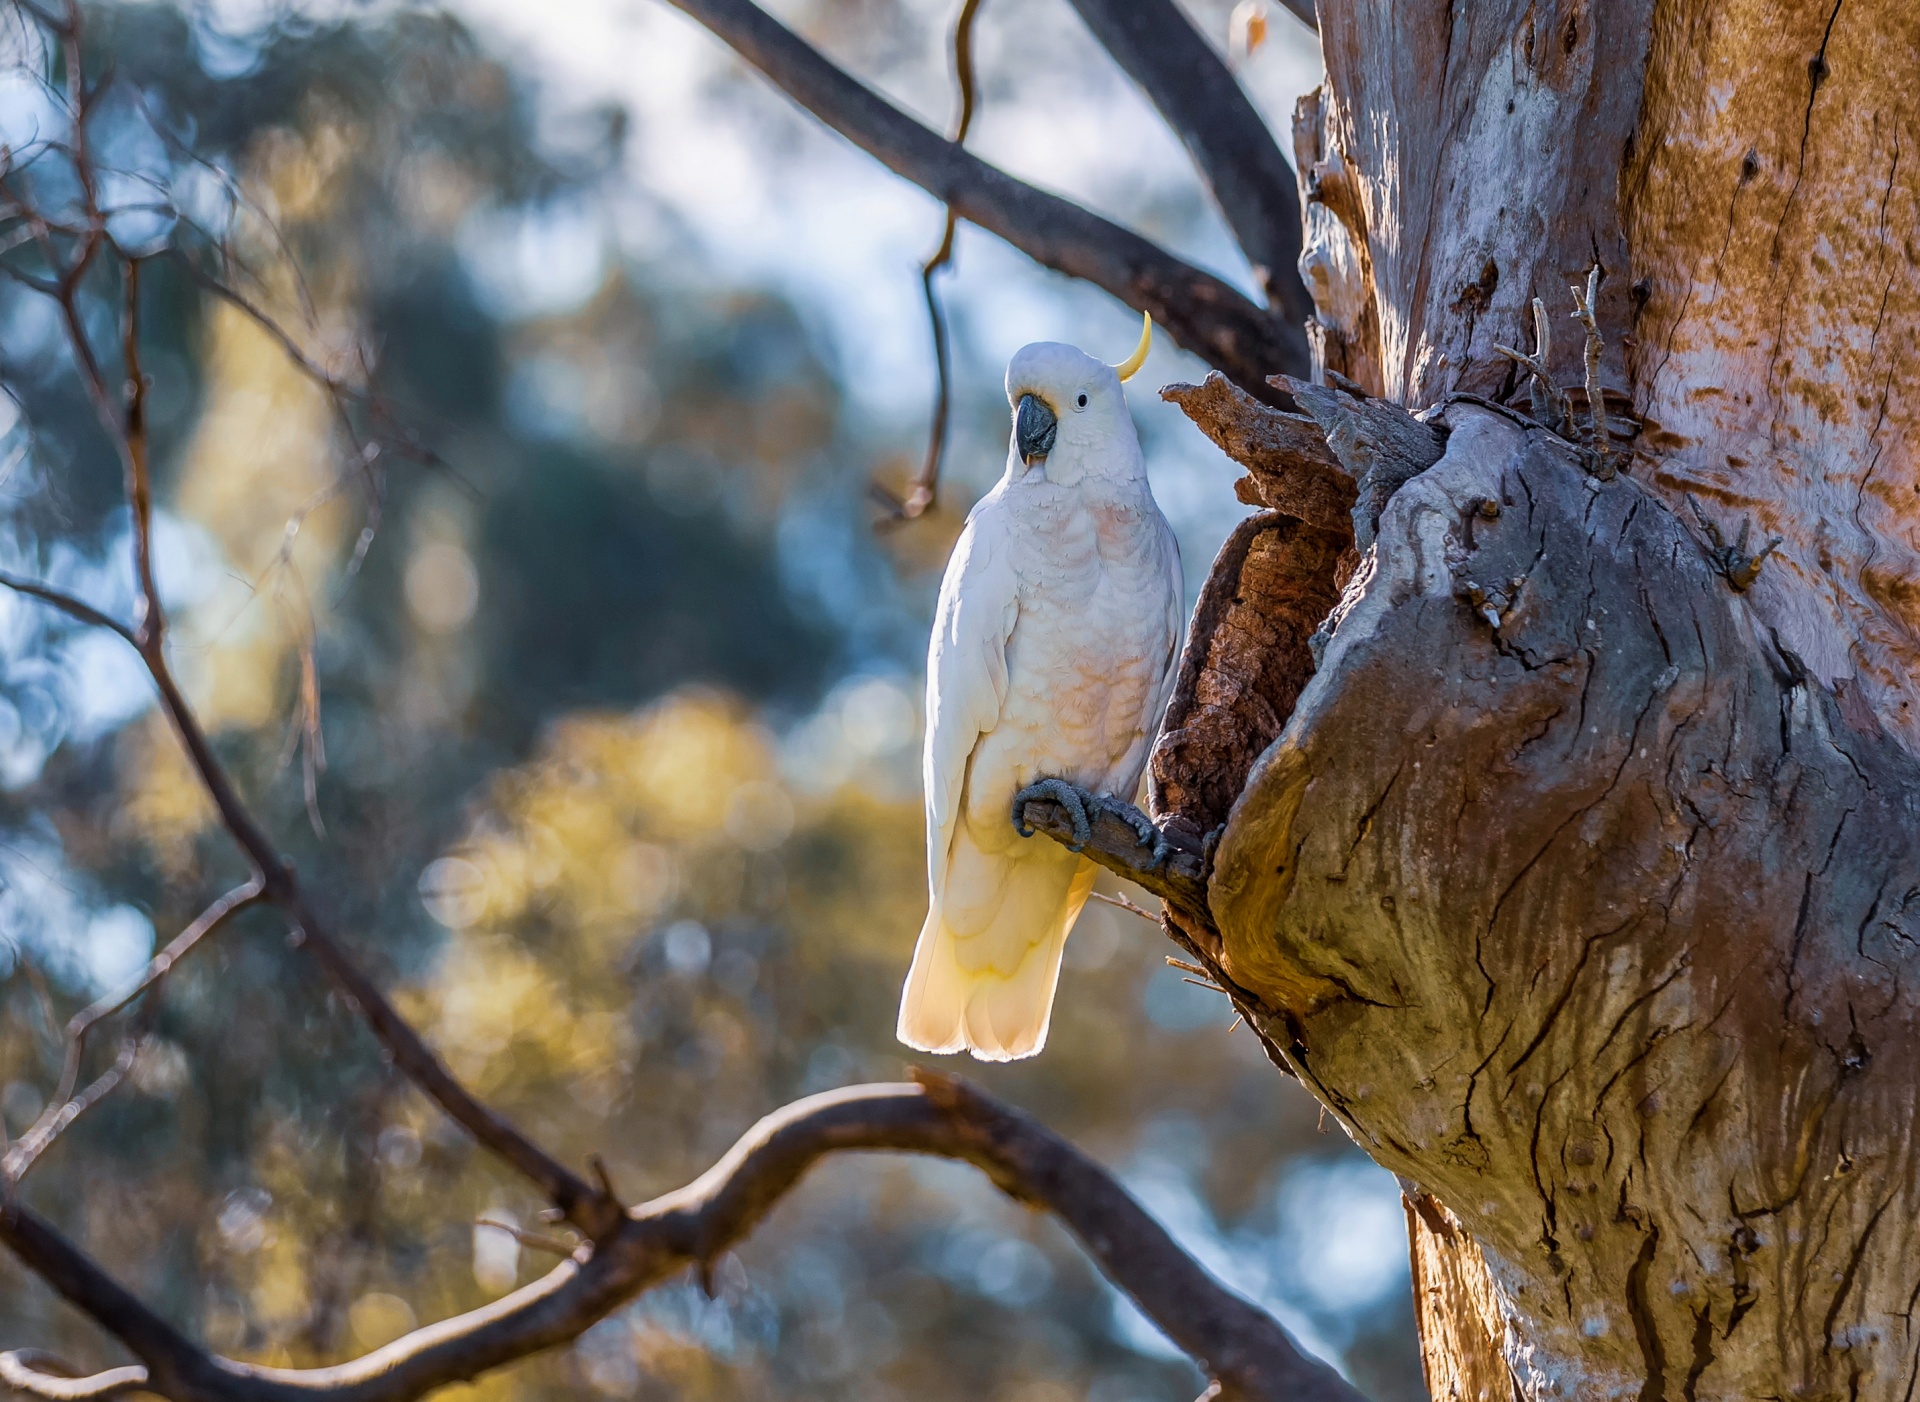 Sulphur-crested cockatoo looking for a nesting tree hollow